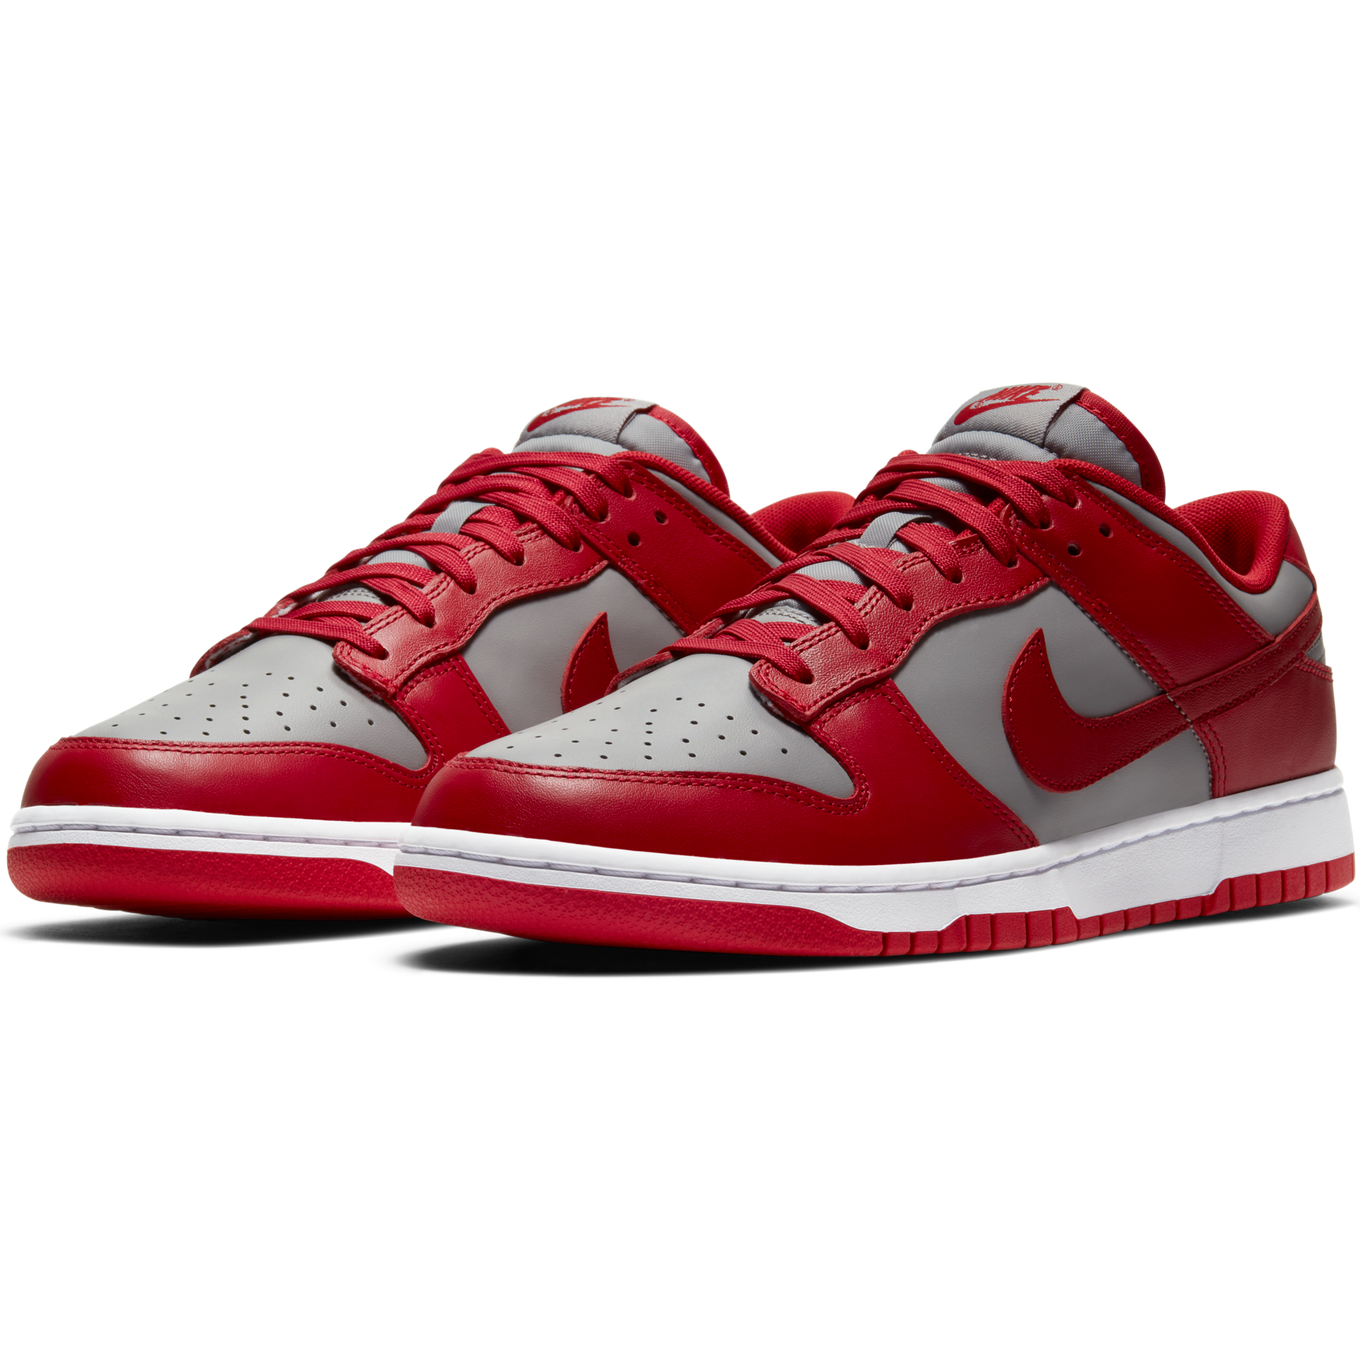 Nike Shoe With Mirror And Back Support Nike Dunk Low Retro